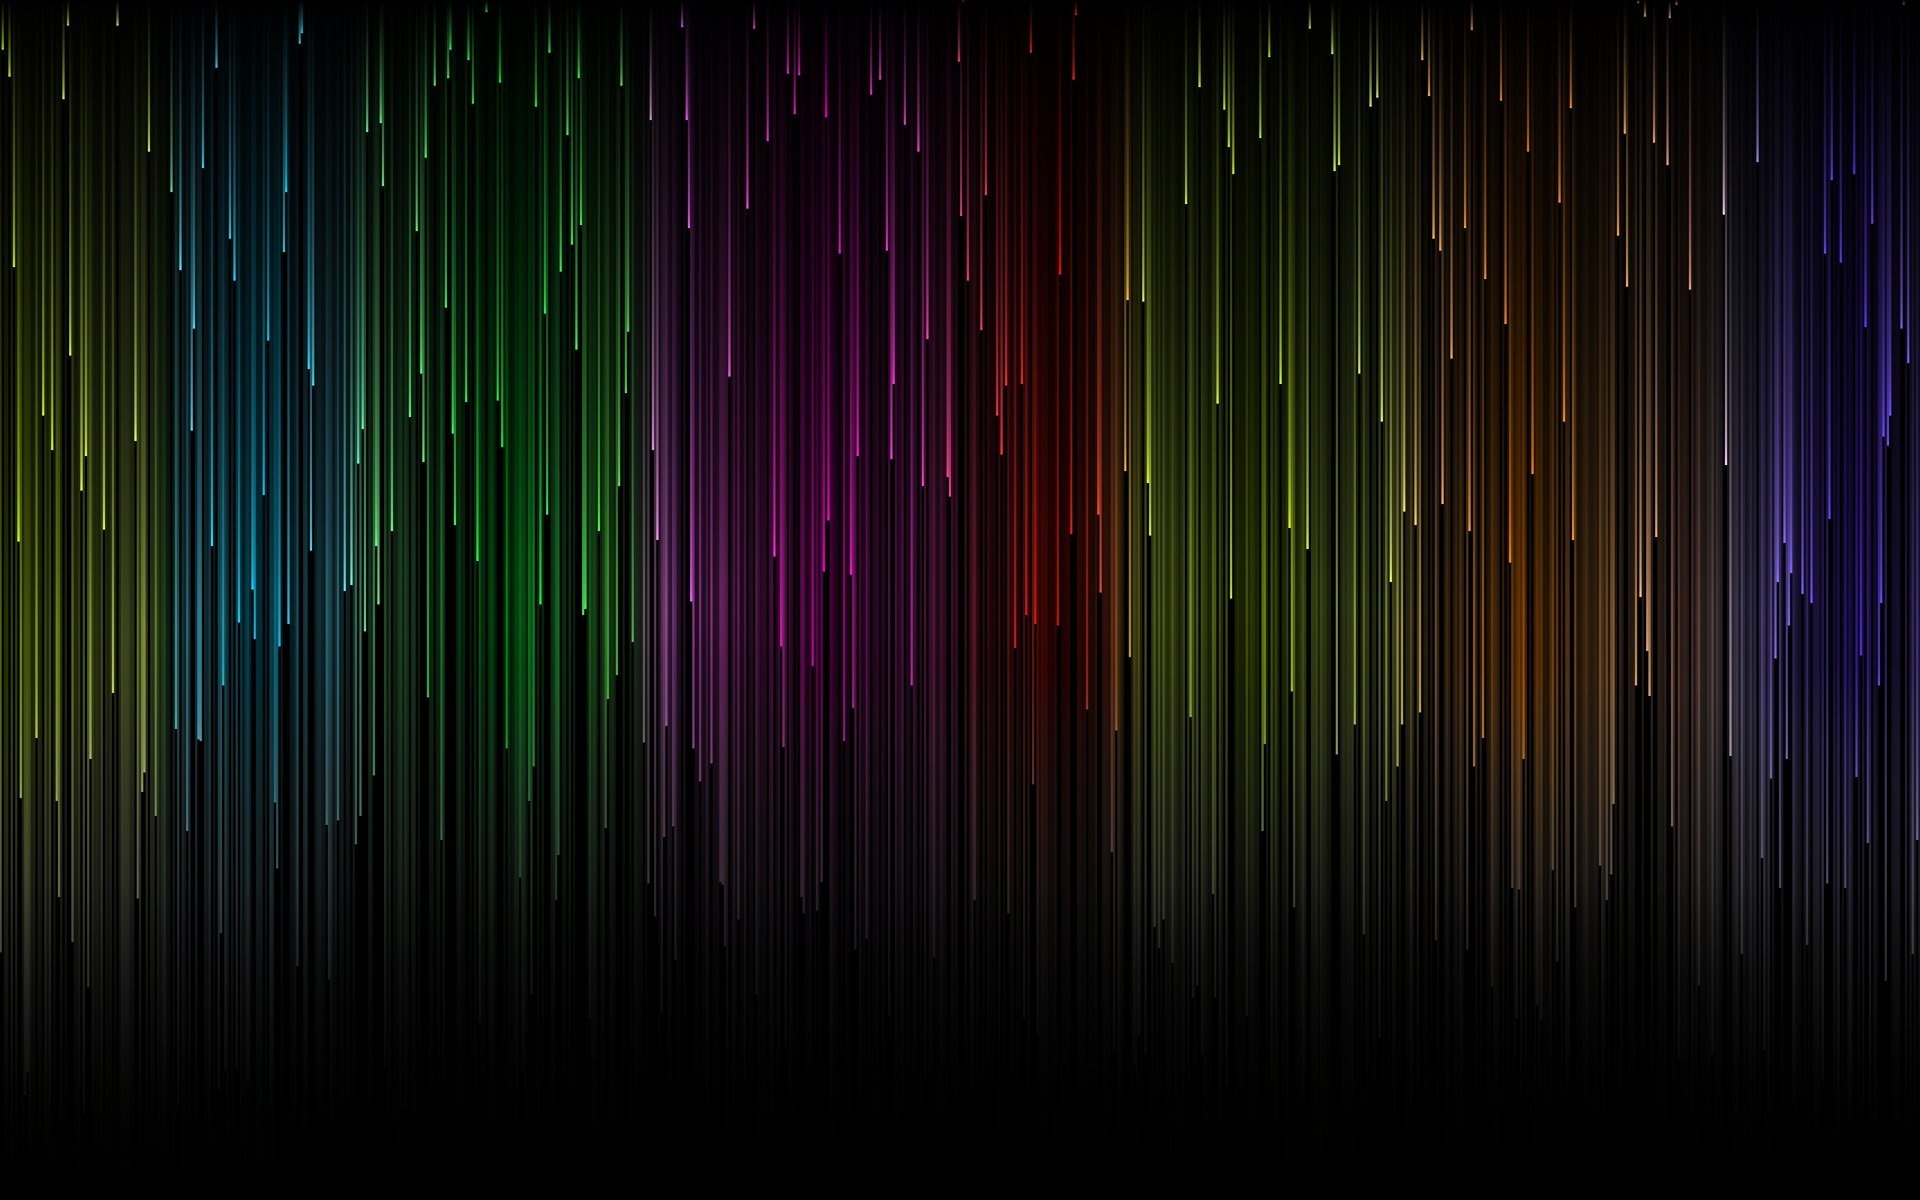 Dark Clouds Wallpaper HD 1920x1200px 260 Colorful Backgrounds